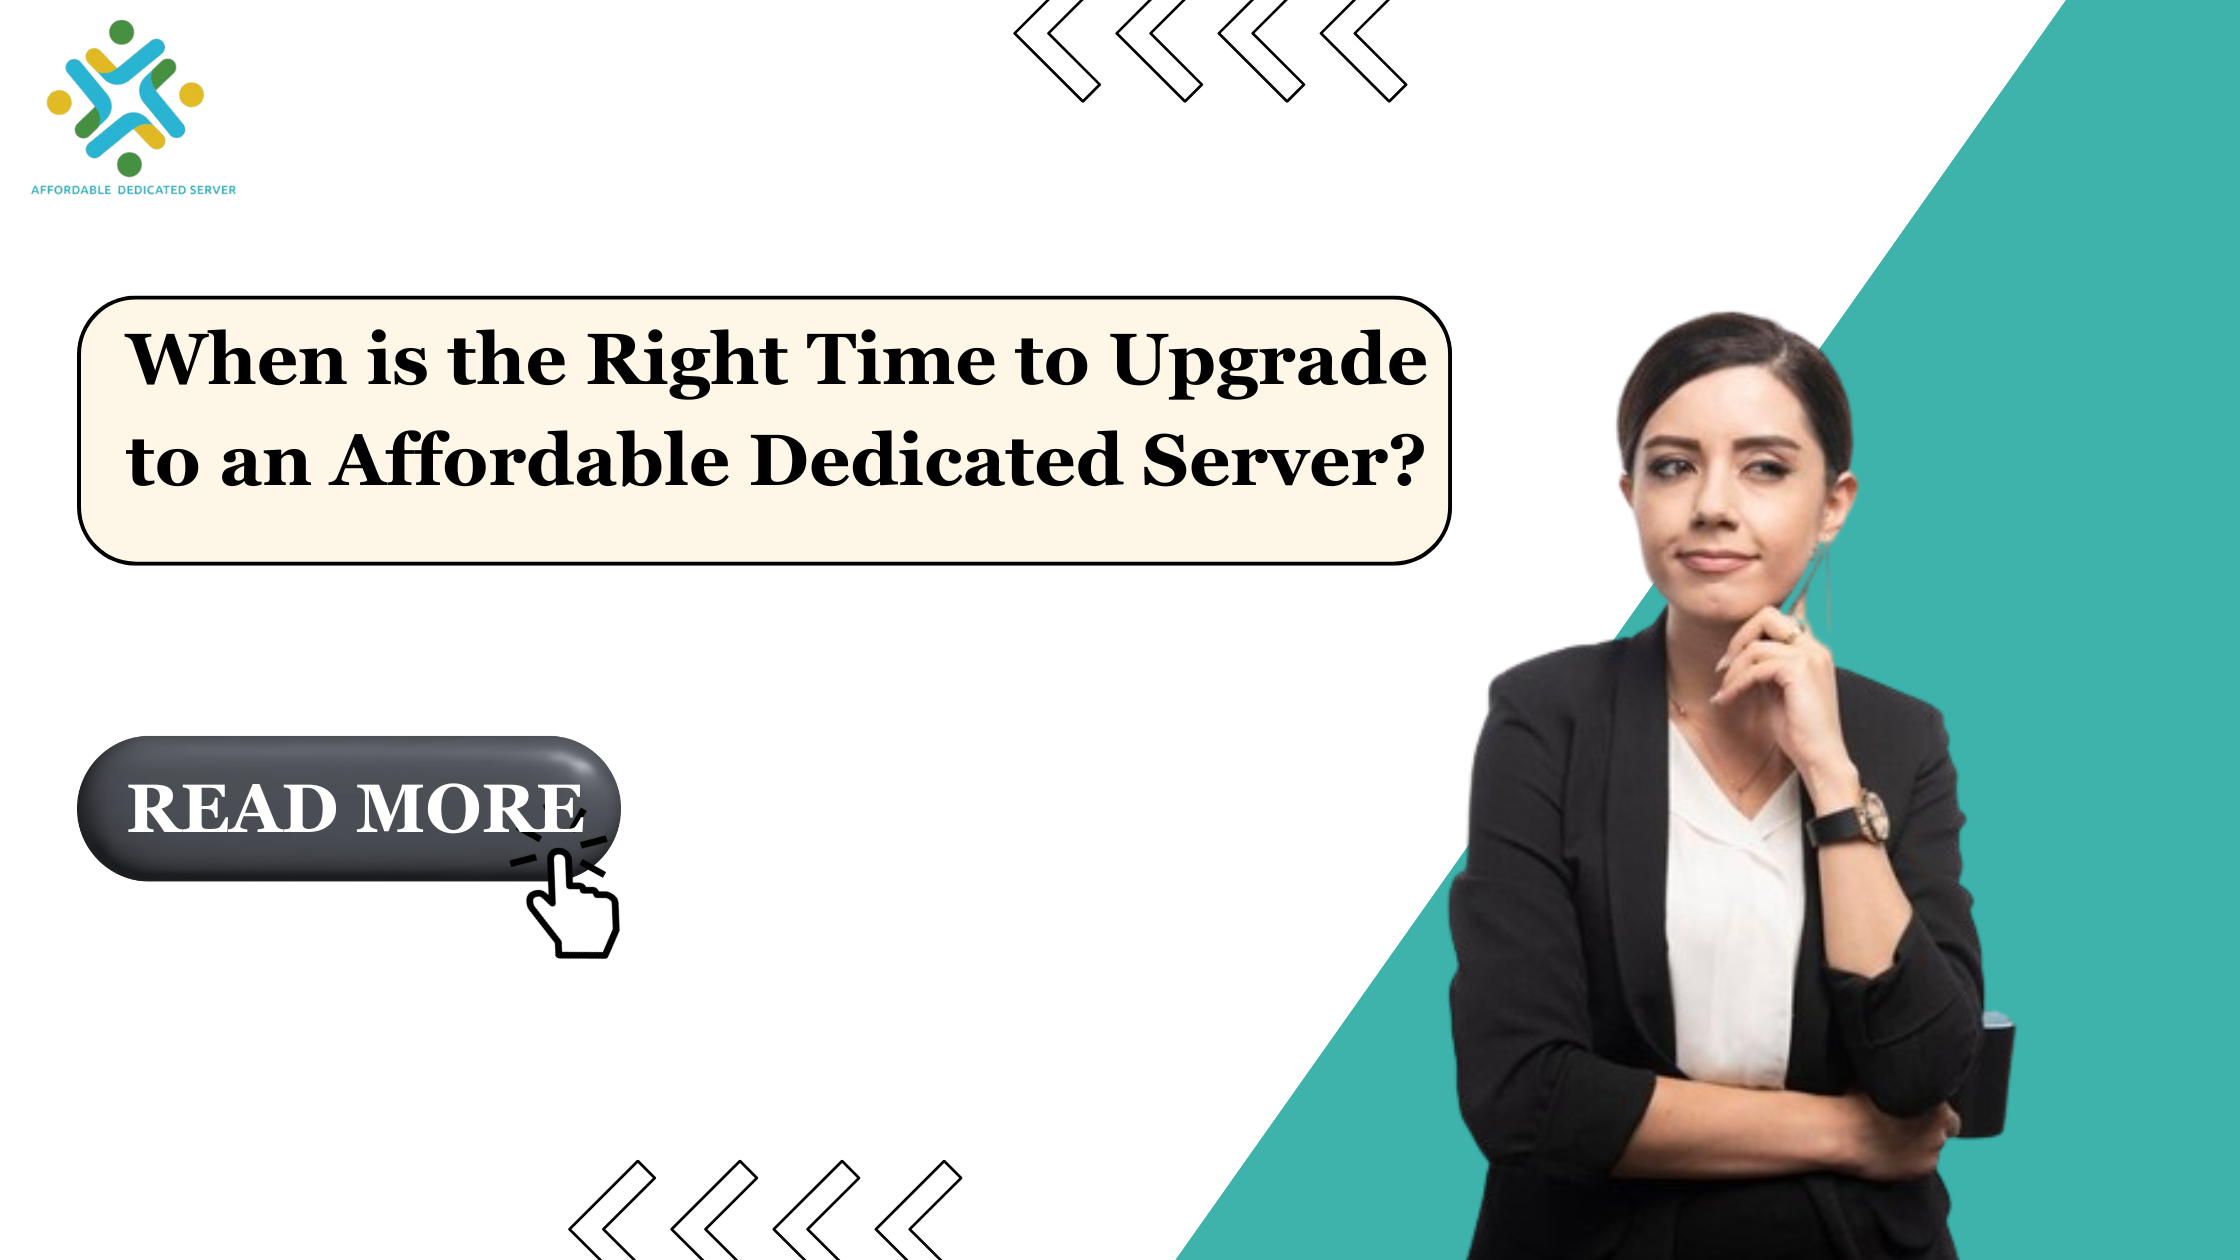 When is the Right Time to Upgrade to an Affordable Dedicated Server?